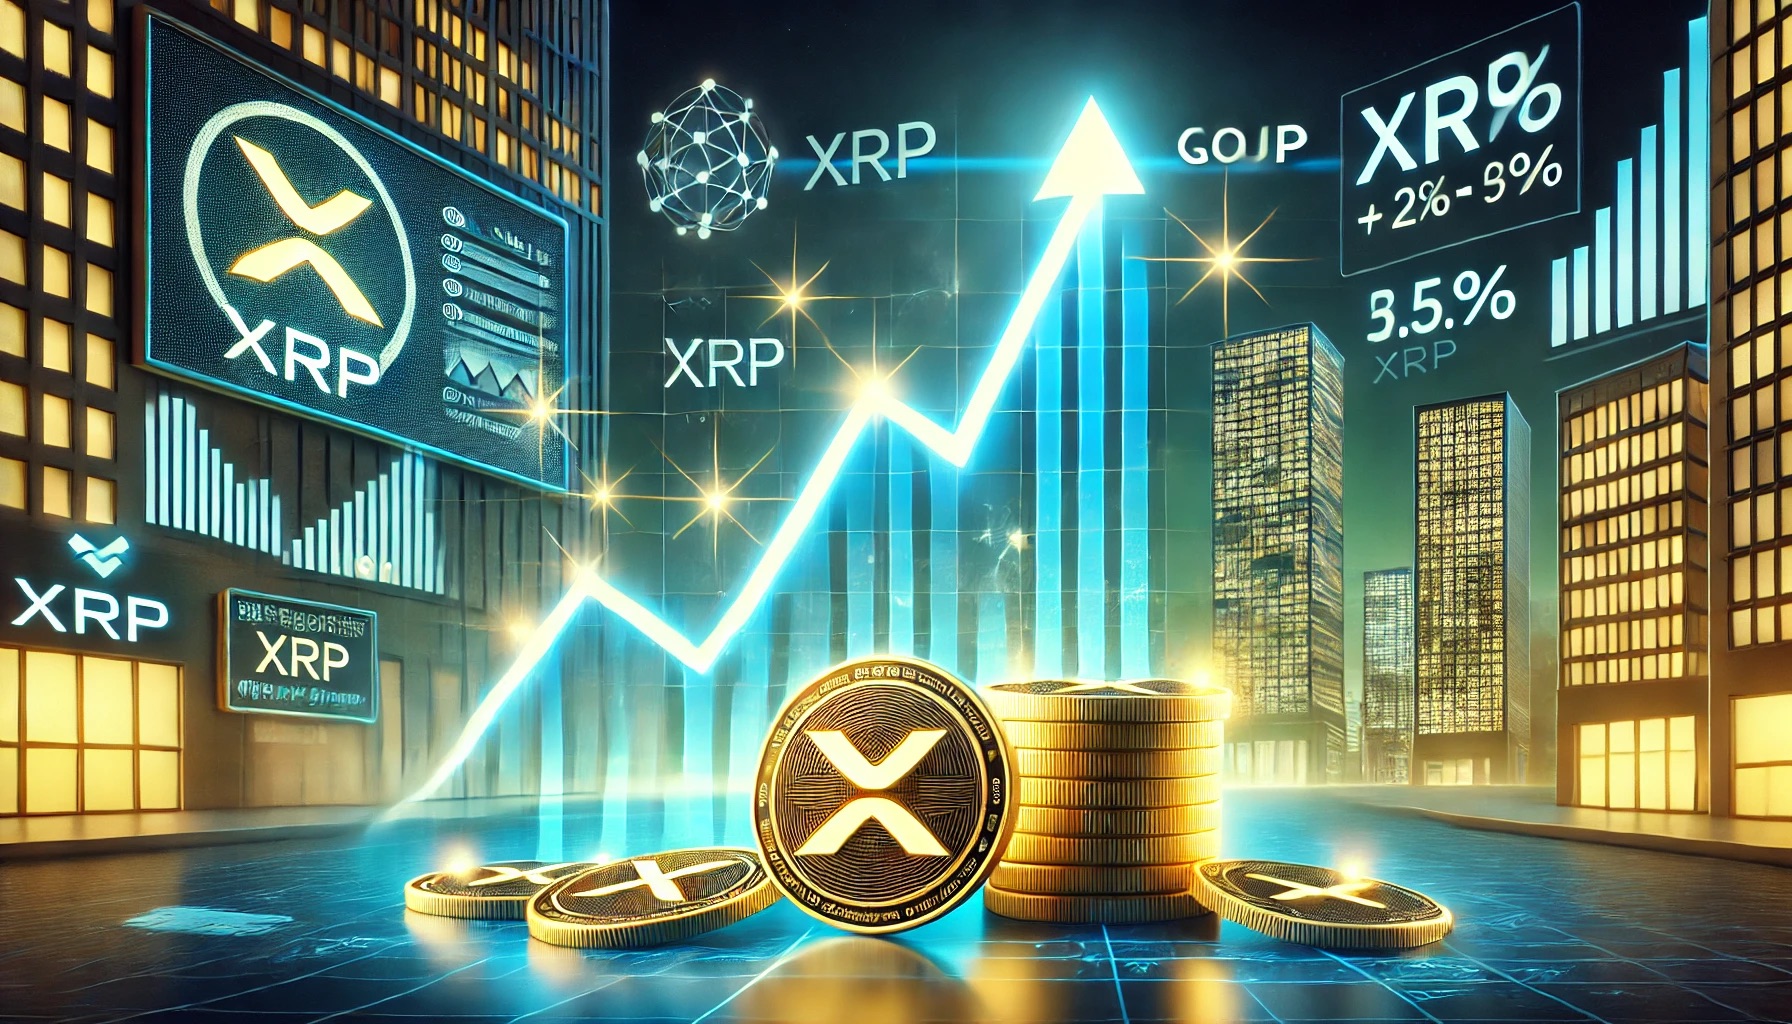 The XRP price is seeing another triangle formation on its chart that could point to an impending rally. One important fact about this triangle formation is the fact that it led to a significant rally seven years ago, and if history repeats itself, then XRP may be set for a bullish wave. XRP Triangle Formation Signals Bullish Continuation In an analysis on TradingView, crypto analyst TradingShot pointed out that the XRP price is seeing another triangle formation. This formation comes from the culmination of a number of indicators, all of which have become bullish during this time. Related Reading: Analysts Battle Over Cardano’s Next Move: 12,000% Rally Or 50% Crash? The indicators pointed out by the crypto analyst include the price closing below its 1W MA50 and 1W MA200. While, at first glance, this could look bearish, it can be a bit signal that propels the price up as investors start to get back in at low prices. This is also made obvious by the 1W RSI dropping to 40.00, as historically, this indicator at this level has always presented a buying opportunity. Furthermore, the crypto analyst points out that the XRP price is currently testing the bottom with the higher lows trend line. All of these have come together to form a triangle structure that has not been seen since 2013-2017. This triangle structure is important given that the last time it appeared in 2013 and eventually broke out in 2017, the XRP price went on to rally to new all-time highs. Therefore, the appearance of this triangle structure this time around could signal the start of another bullish trend that pushes the altcoin’s price toward new all-time highs as well. How Far Can The Price Go? In the scenario where the XRP price does follow the 2013-2017 trend and a breakout occurs, the crypto analyst does see the price reaching a new all-time high. However, for this to happen and for the bullish trend to be confirmed, the price will have to break above the 1W MA200, as the analyst explains. Related Reading: Crypto Research Firm Says Bitcoin Crash Below $60,000 May Not Be The End, Here’s Why In such a case that the altcoin does break this important level, TradingShot puts the price as high as $4.5. Such a move would mean an over 800% increase in value from where the XRP price is currently sitting at $0.47. However, as with any bullish scenario, there is also the possibility that the trend fails to actualize. In the event that the price does not break the 1W MA200, the crypto analyst advises “that the XRP army will need a need narrative to hang on to, as the long-term pattern would have failed them.” Featured image created with Dall.E, chart from Tradingview.com